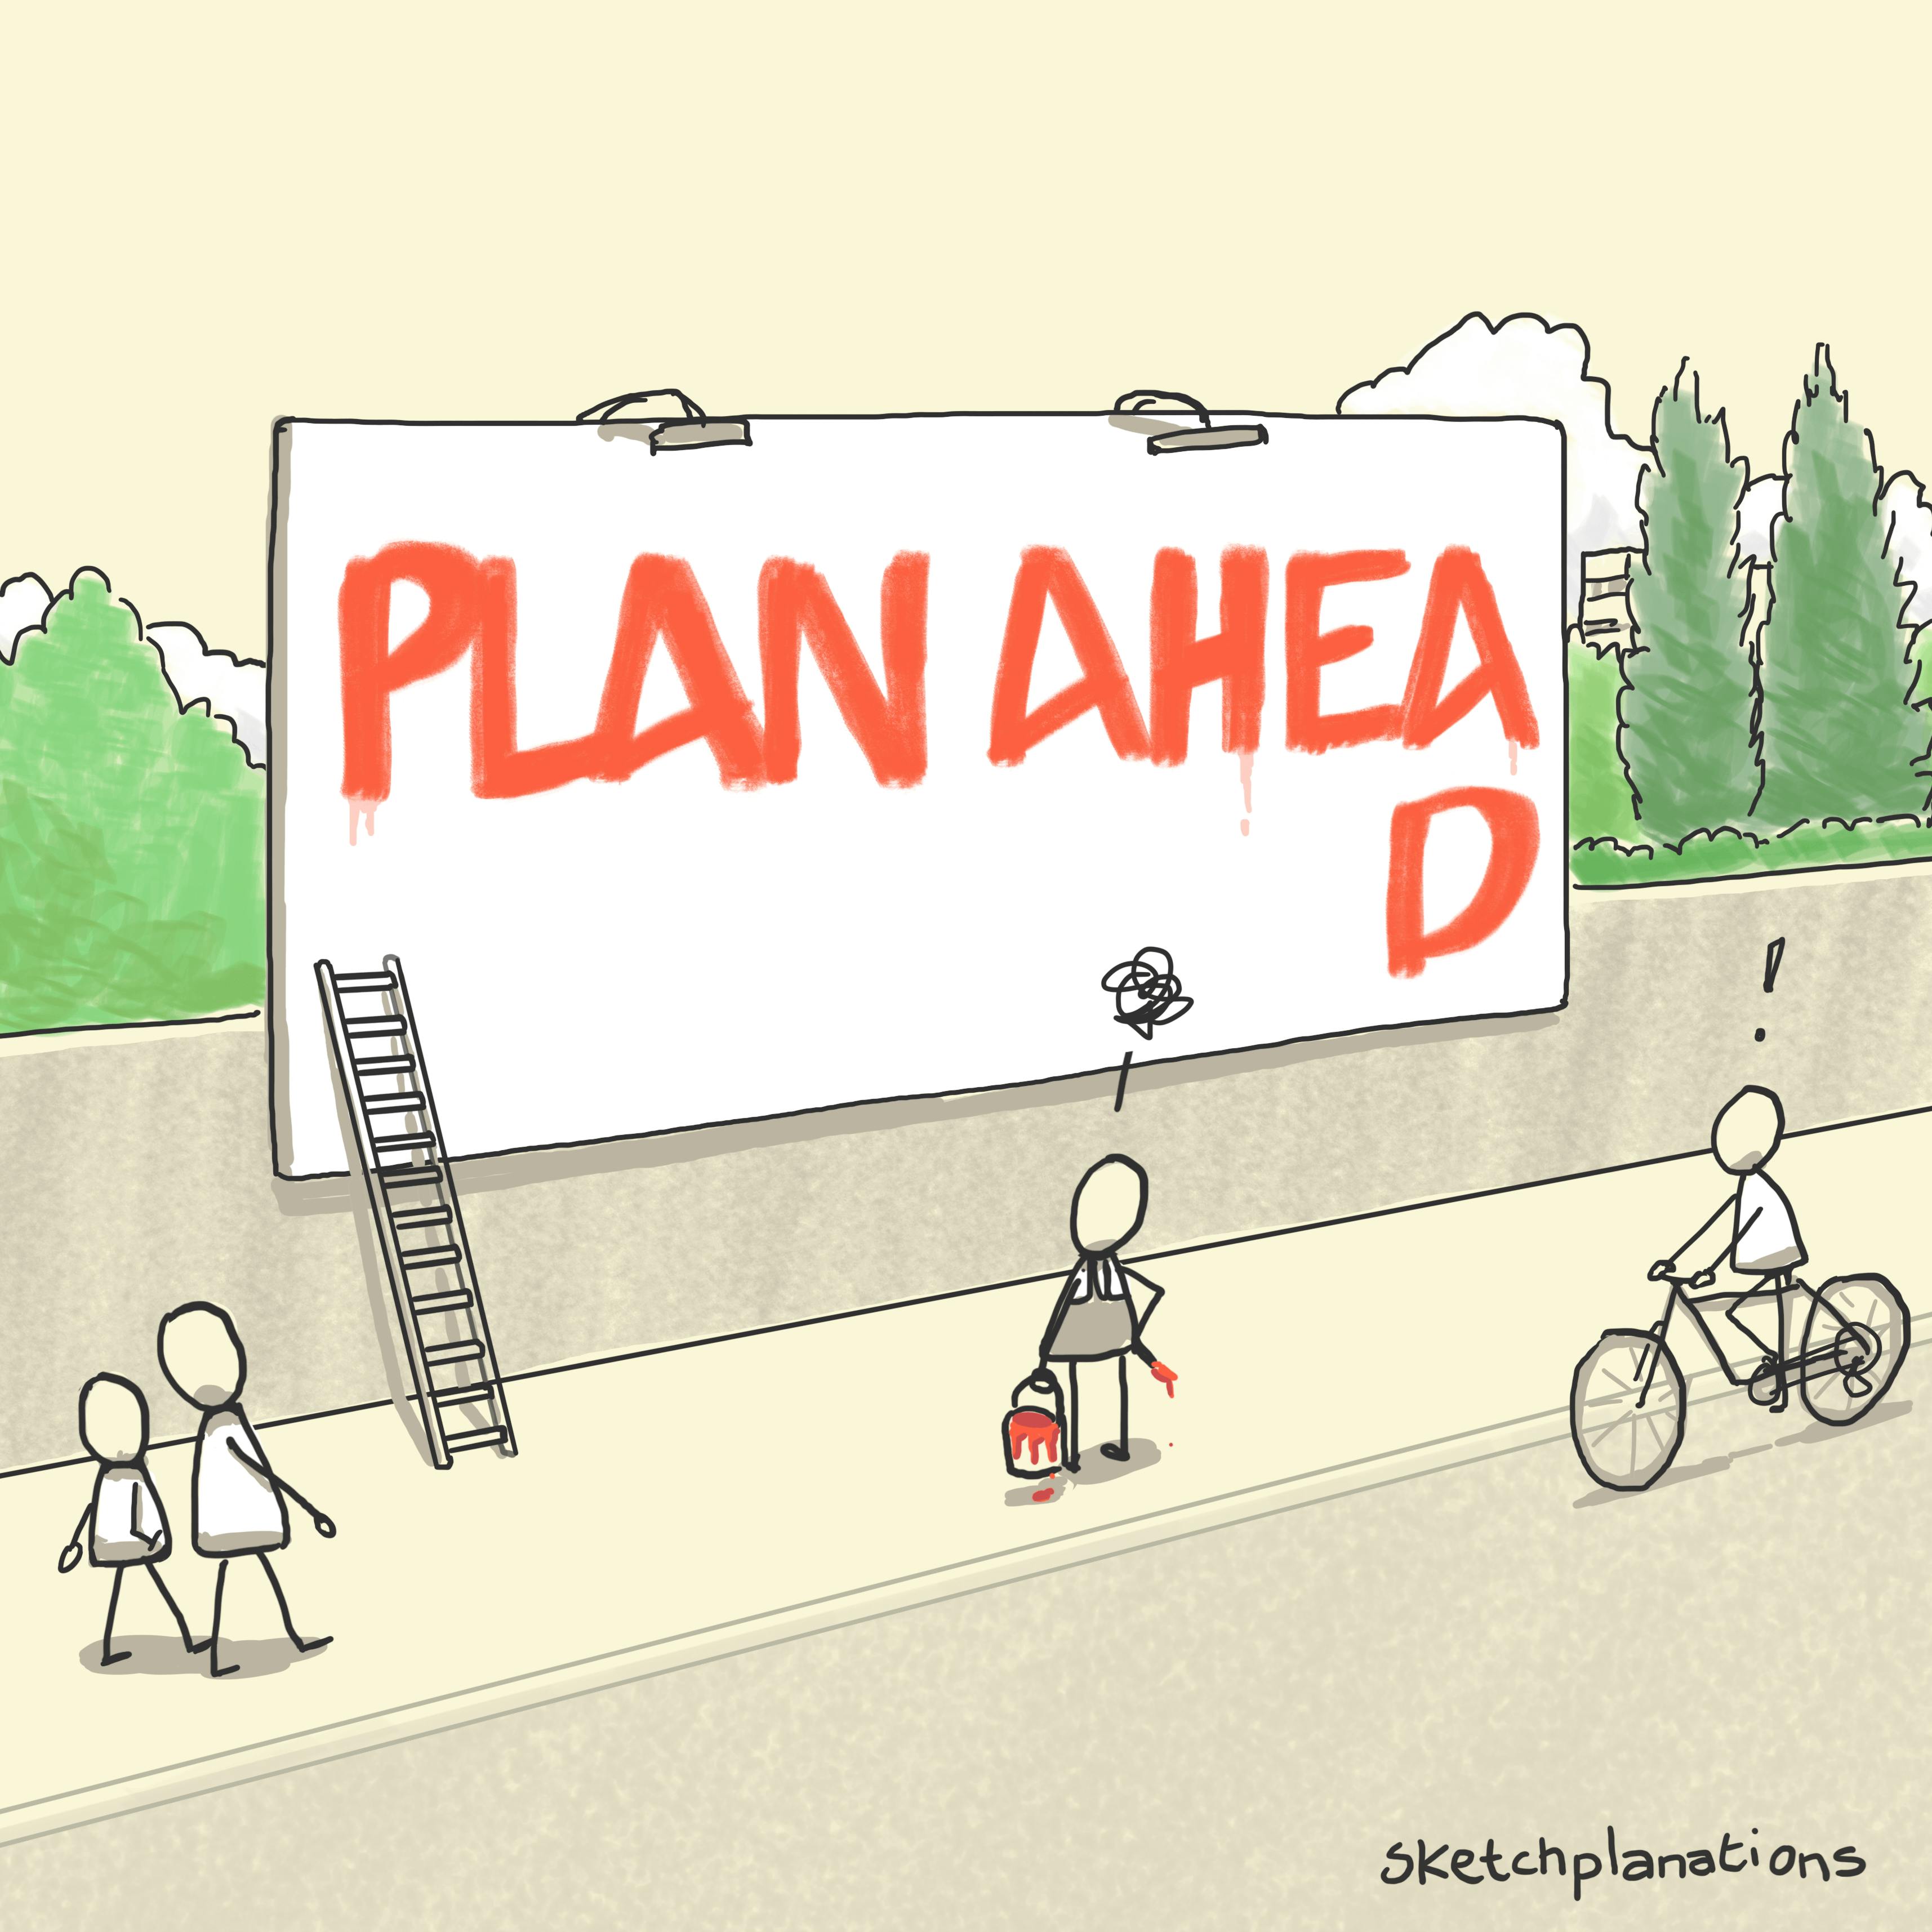 Plan ahead illustration: A painter with passers-by contemplate the lack of planning ahead on a billboard that says Plan Ahead without the D fitting on.